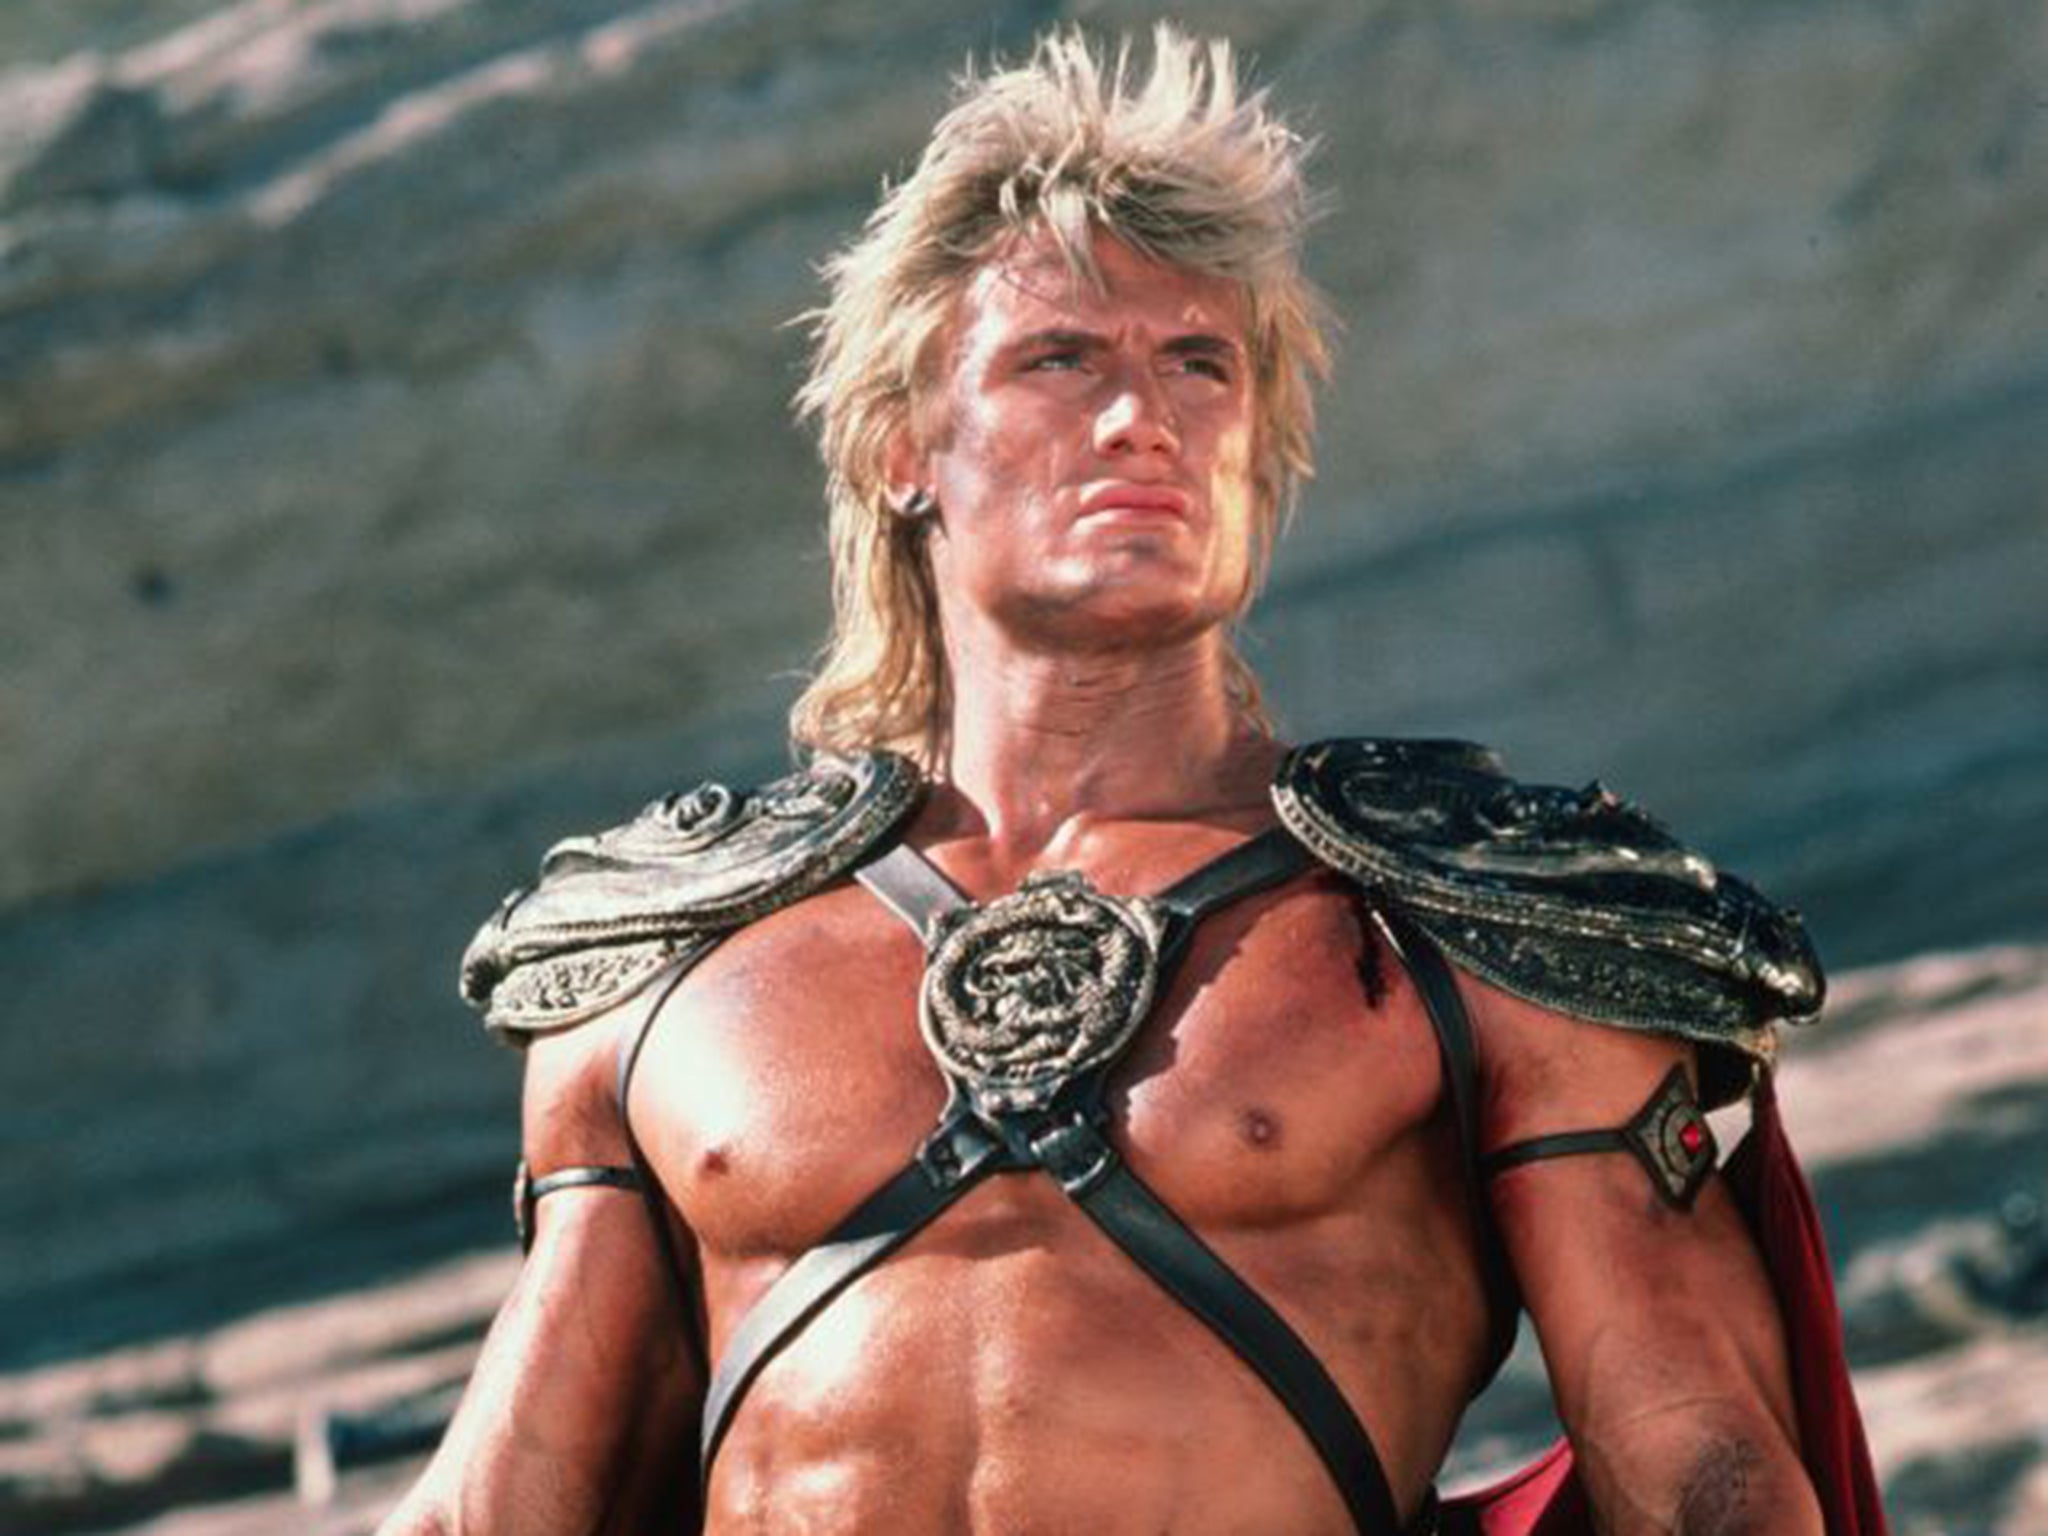 Dolph Lundgren in 1987’s ‘Masters of the Universe’, a flop remembered in ‘Electric Boogaloo: the Wild, Untold Story of Cannon Films’